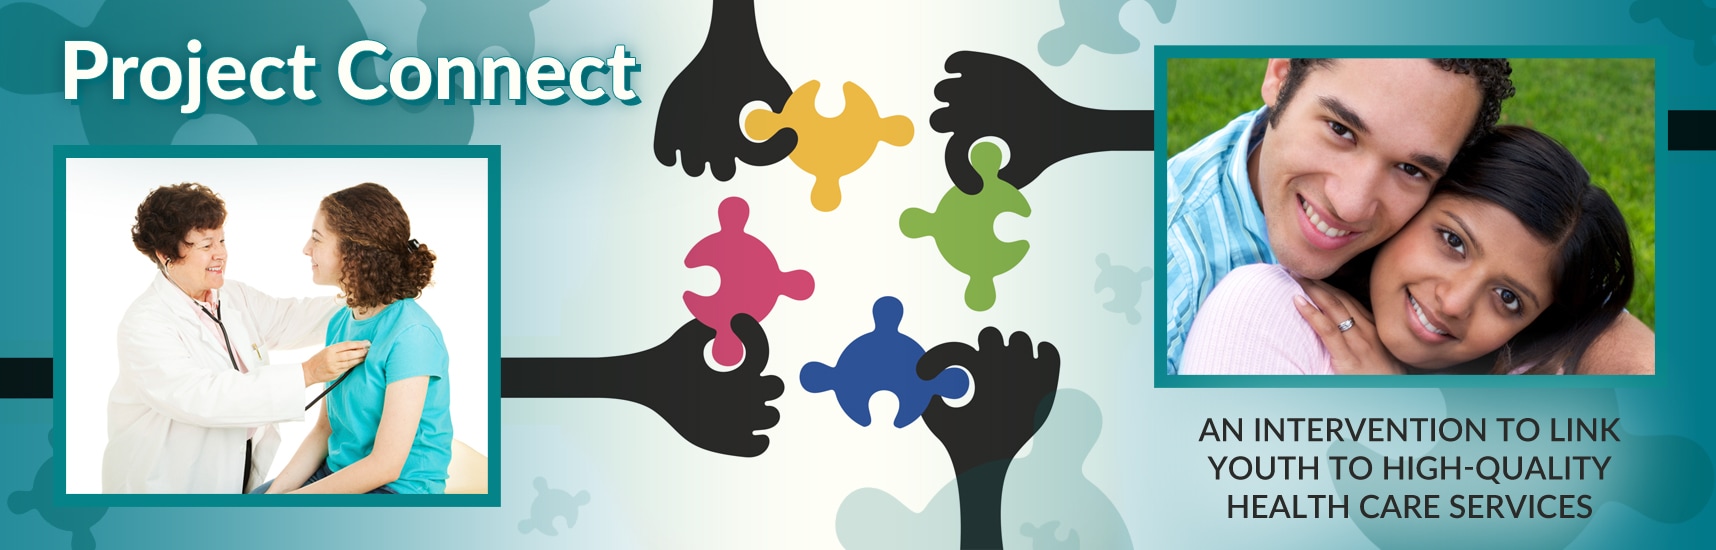 Project Connect, An intervention to link youth to high-quality health care services.